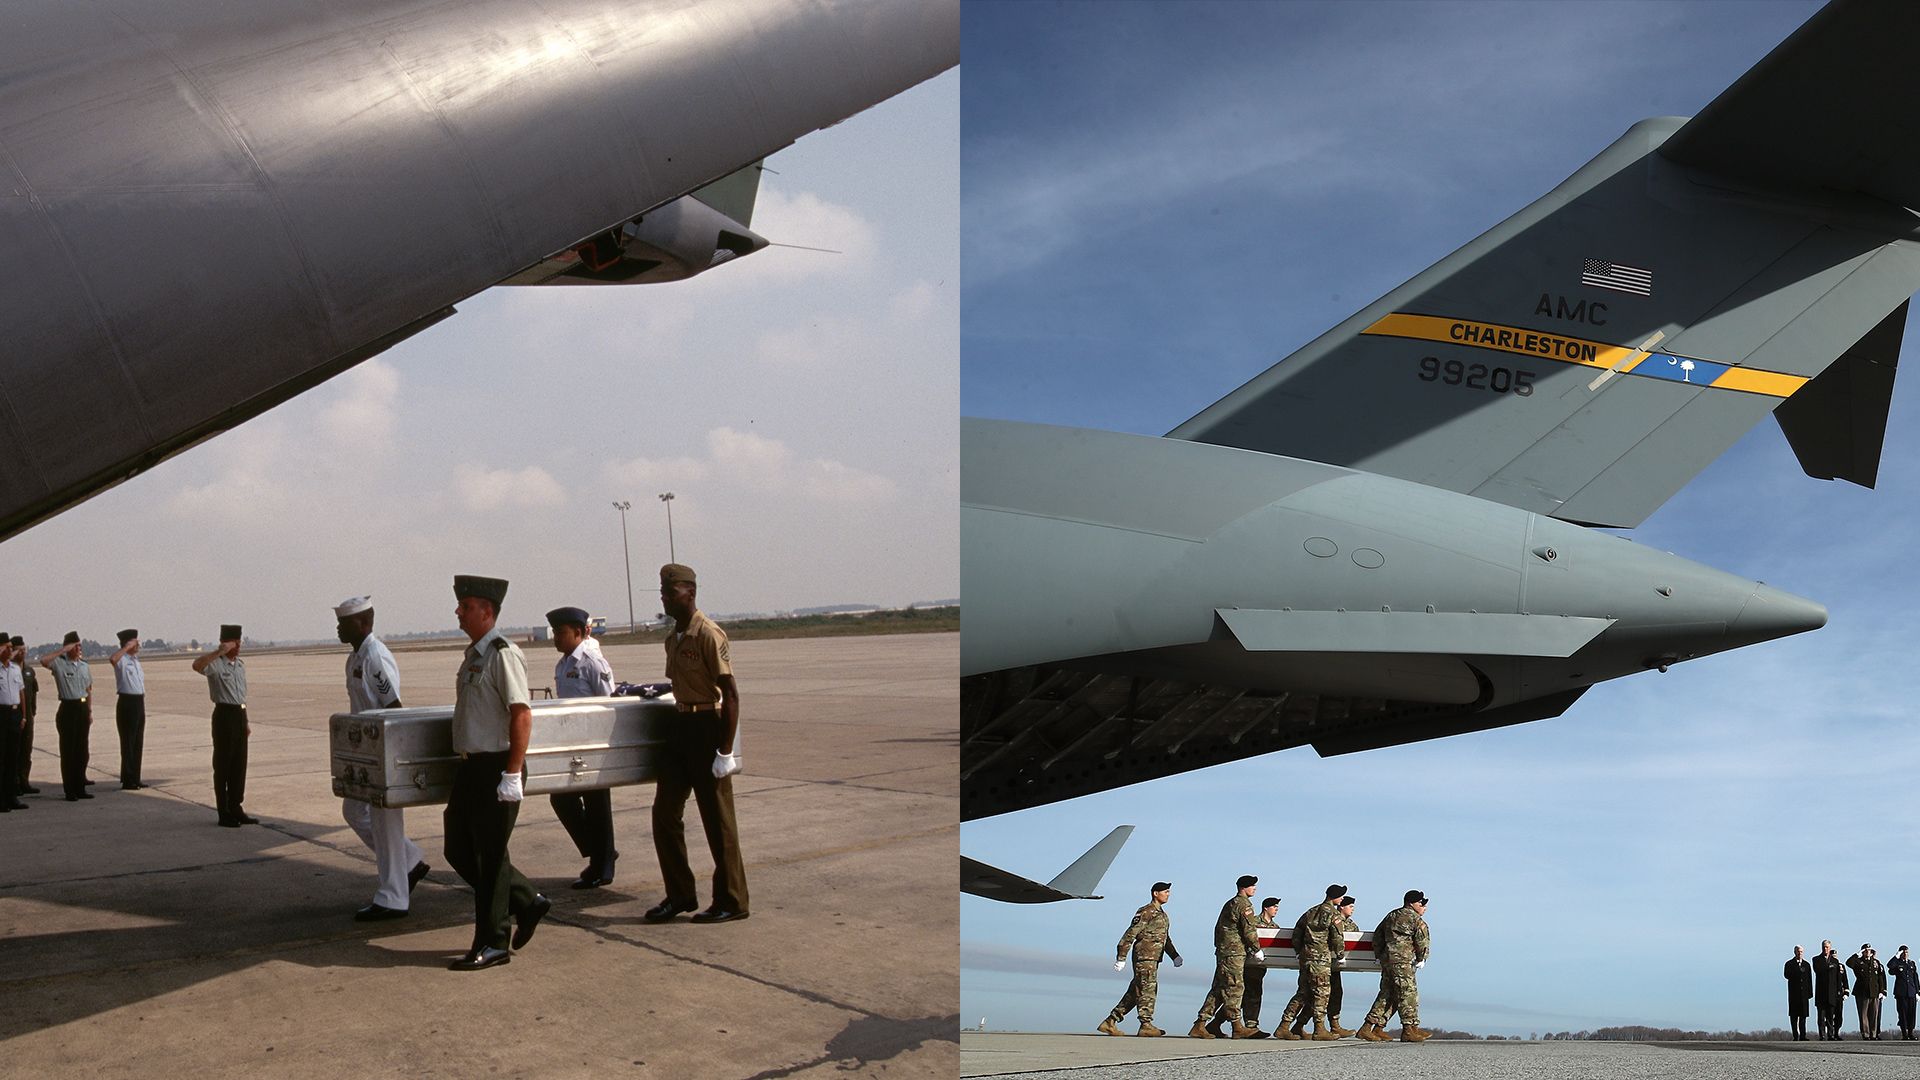 Side by side photos from the Vietnam and Afghanistan wars, showing soldiers carrying coffins draped in American flags out from military aircraft.